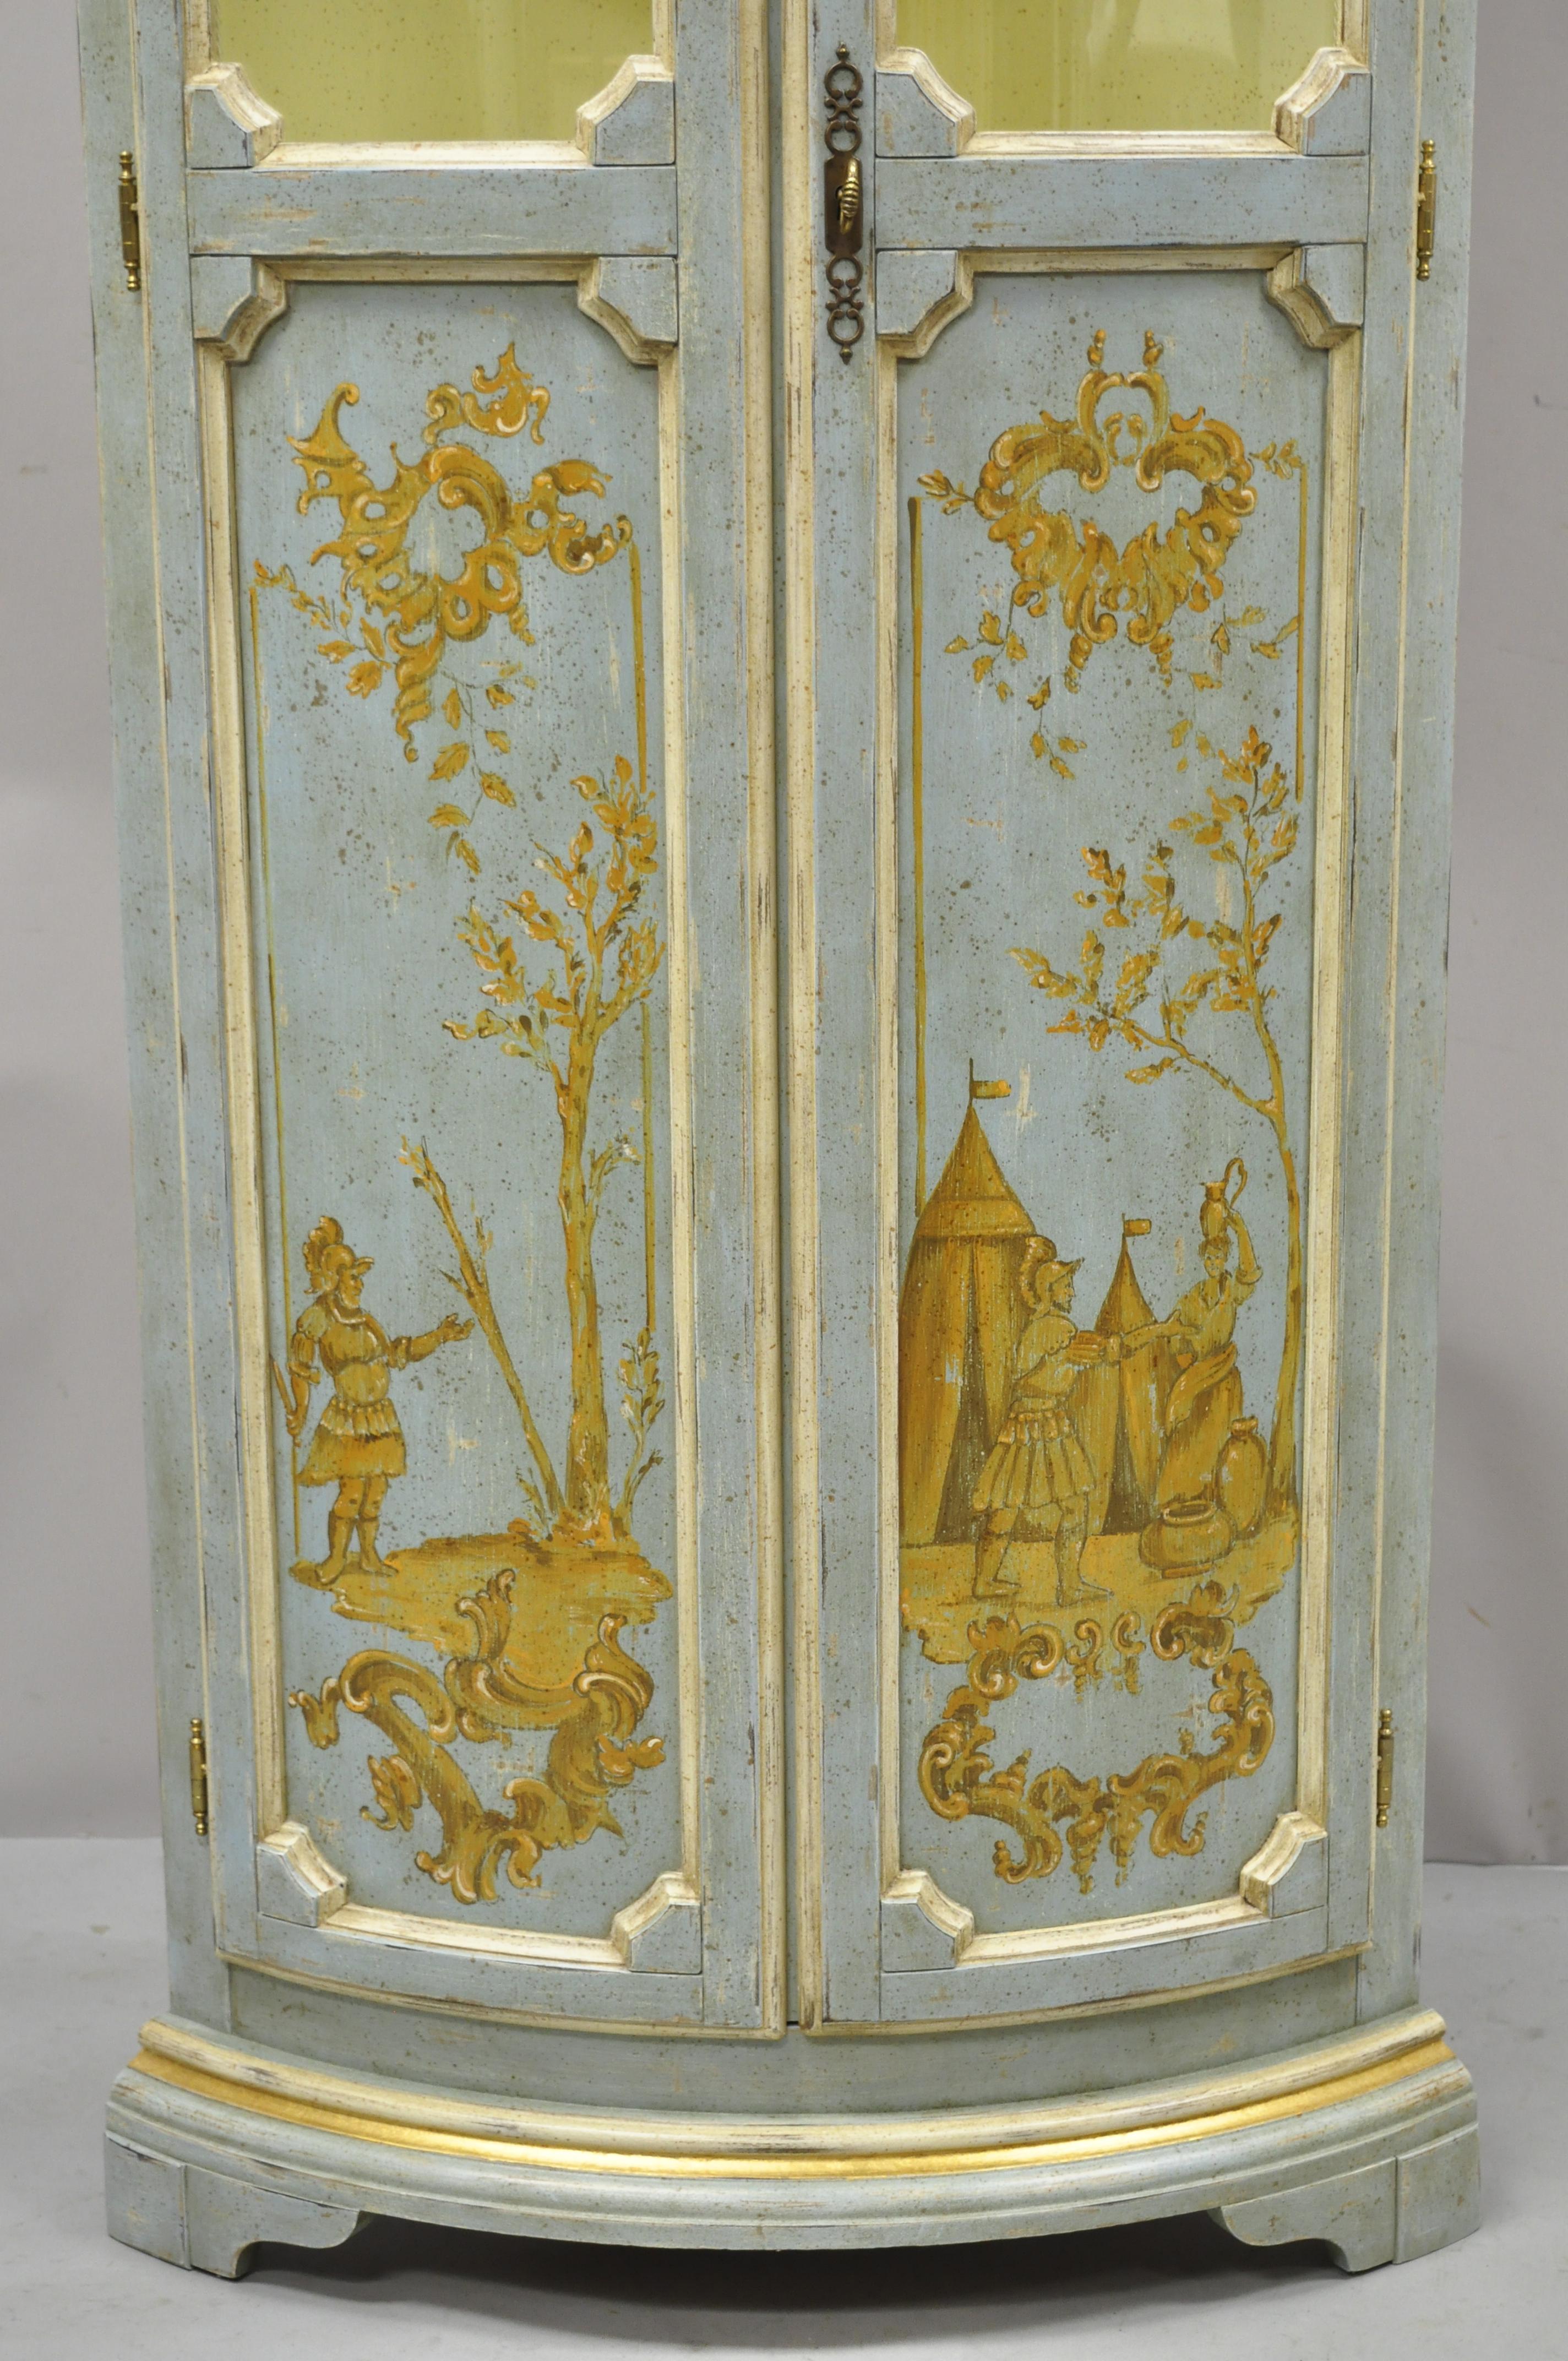 Vintage Italian Venetian blue distress painted tall narrow corner curio china cabinet. Item features tall narrow corner cabinet form, bowed front, curved glass, hand painted scenes, blue distress painted finish, gold accents, 5 wooden shelves, very